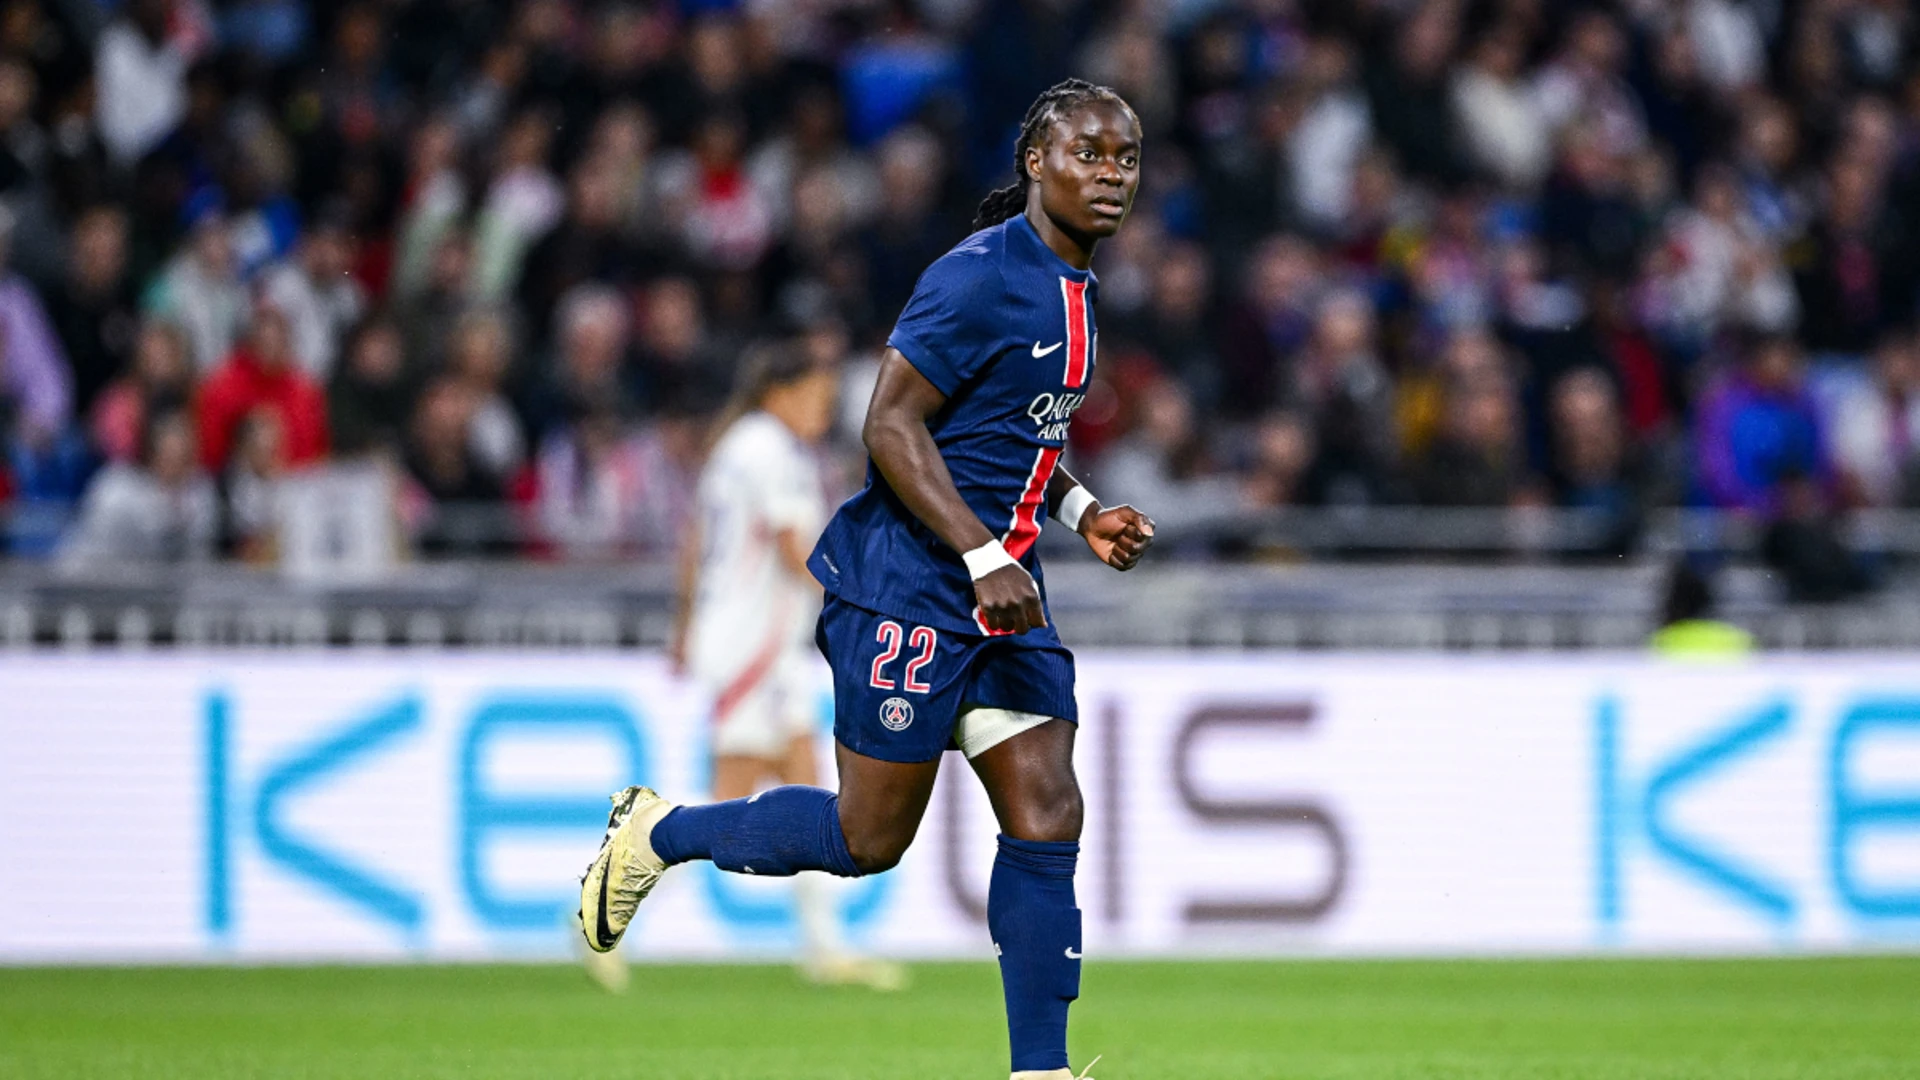 Malawian superstar Chawinga signs for French giants Lyon